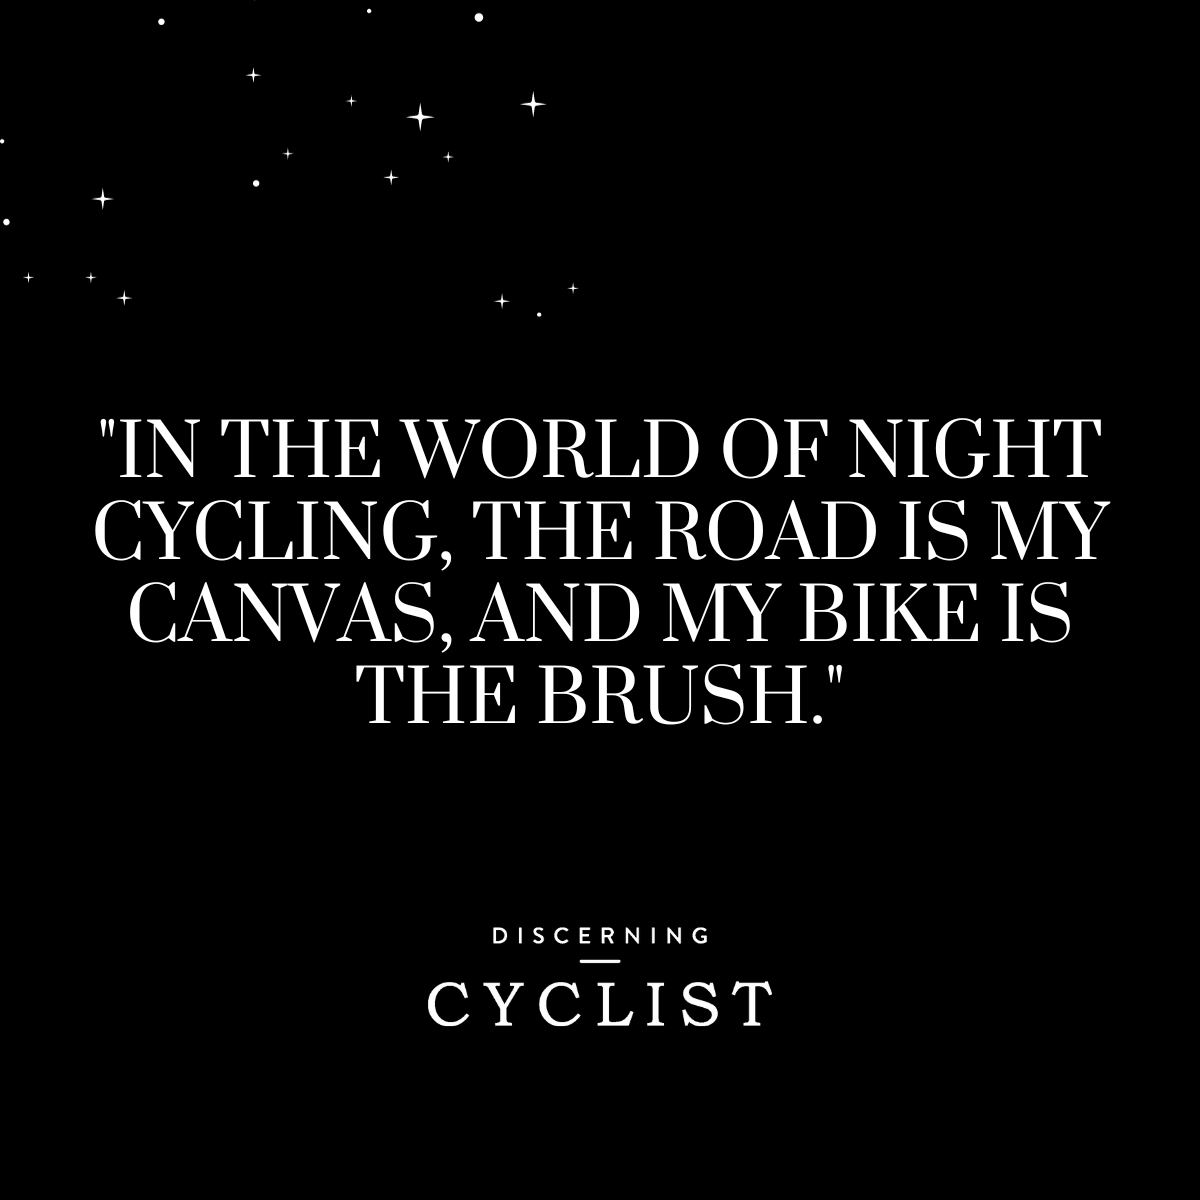 "In the world of night cycling, the road is my canvas, and my bike is the brush."